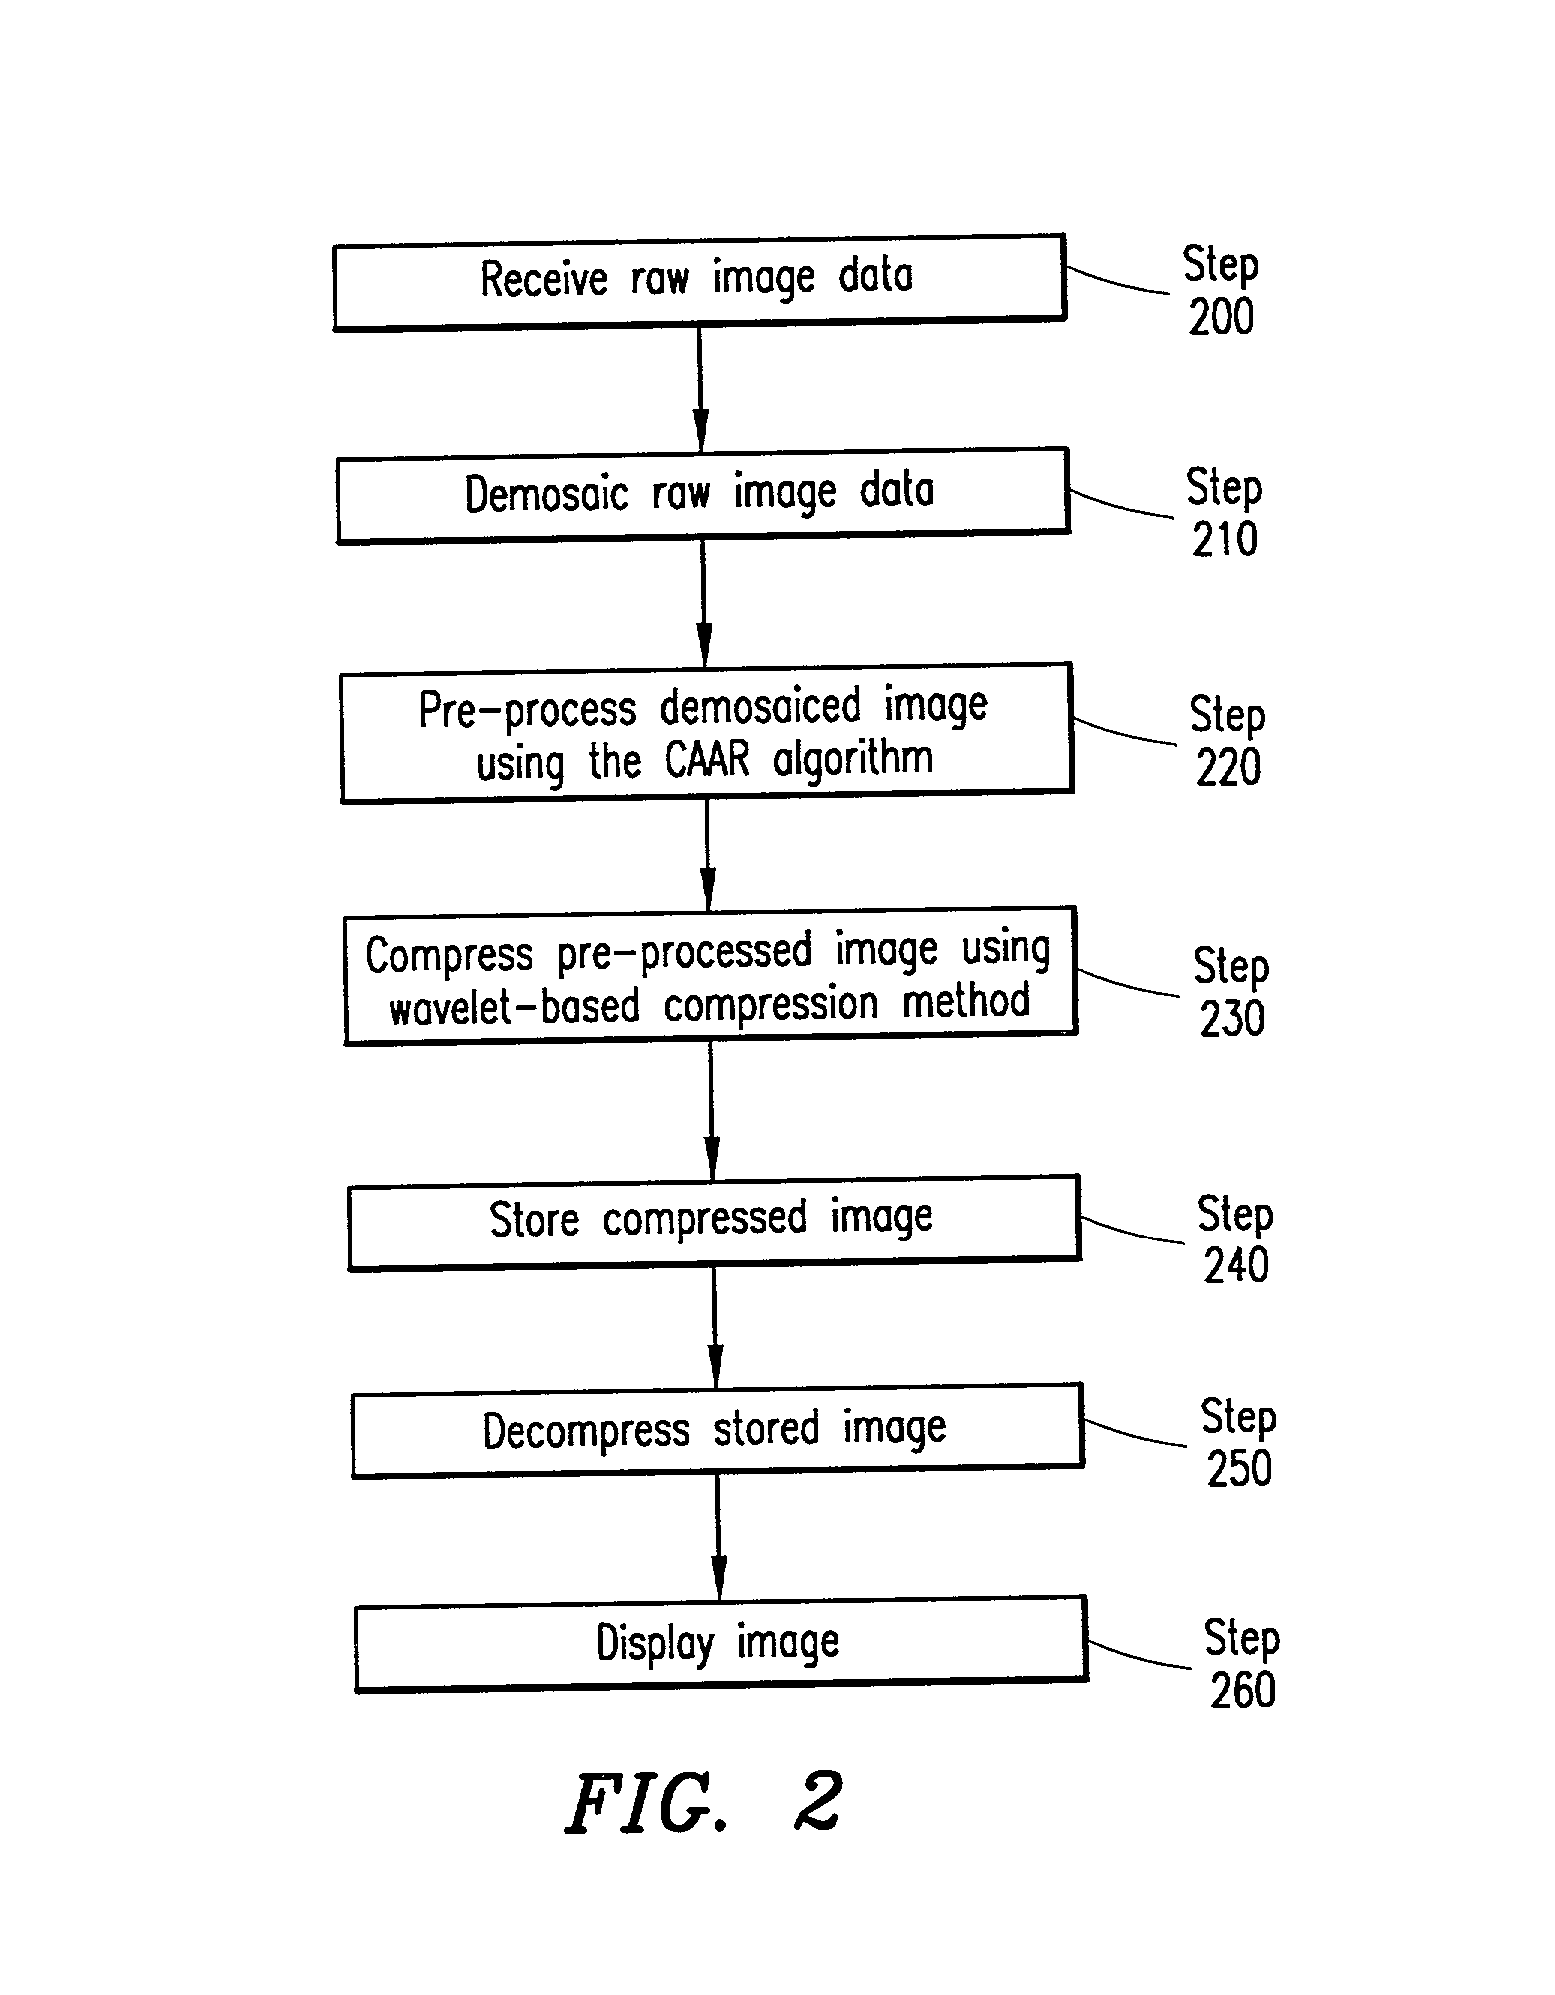 System and method for processing demosaiced images to reduce color aliasing artifacts